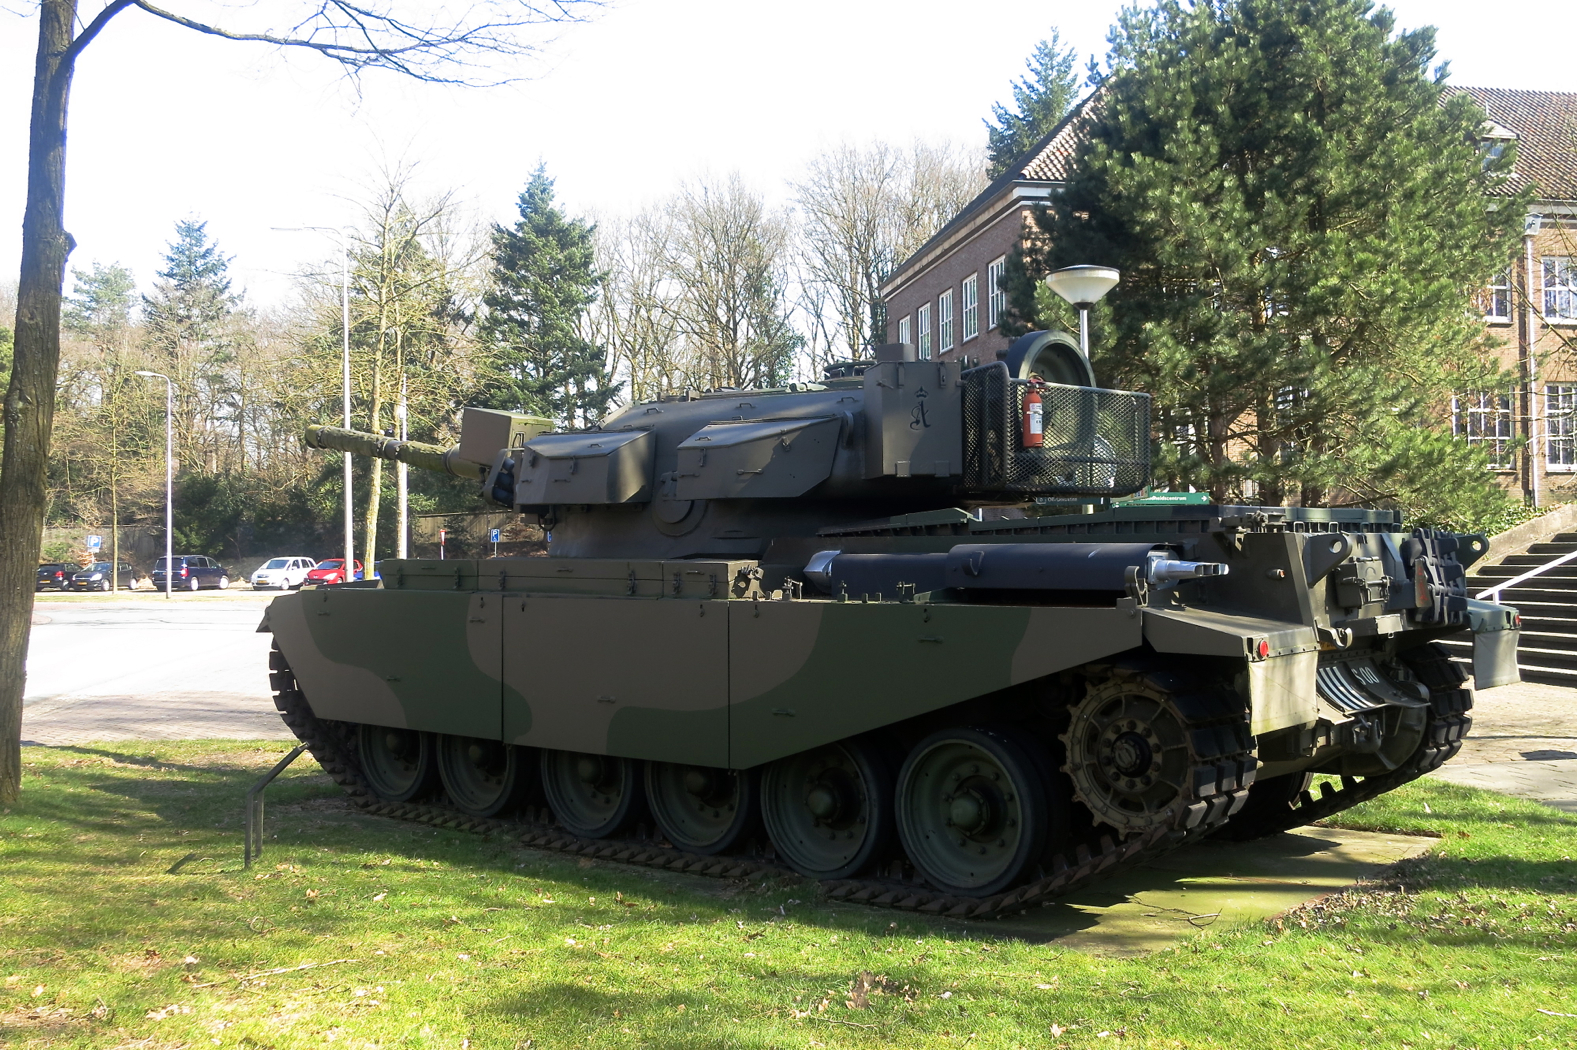 an old military vehicle that has been restored and placed